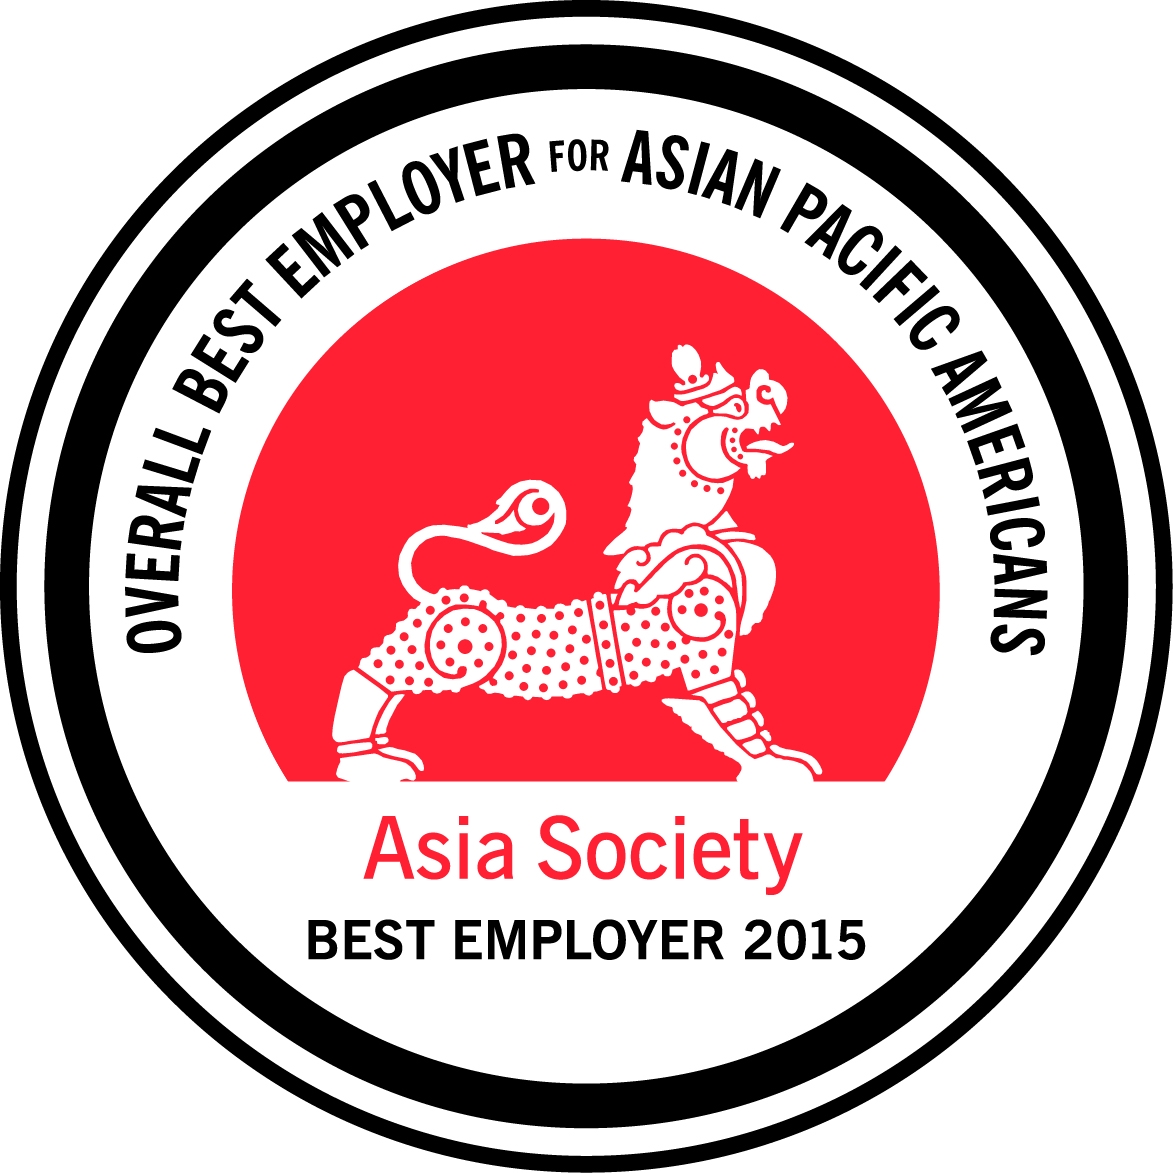 Goldman Sachs wins “Overall Best Employer for APAs” for third consecutive year; 